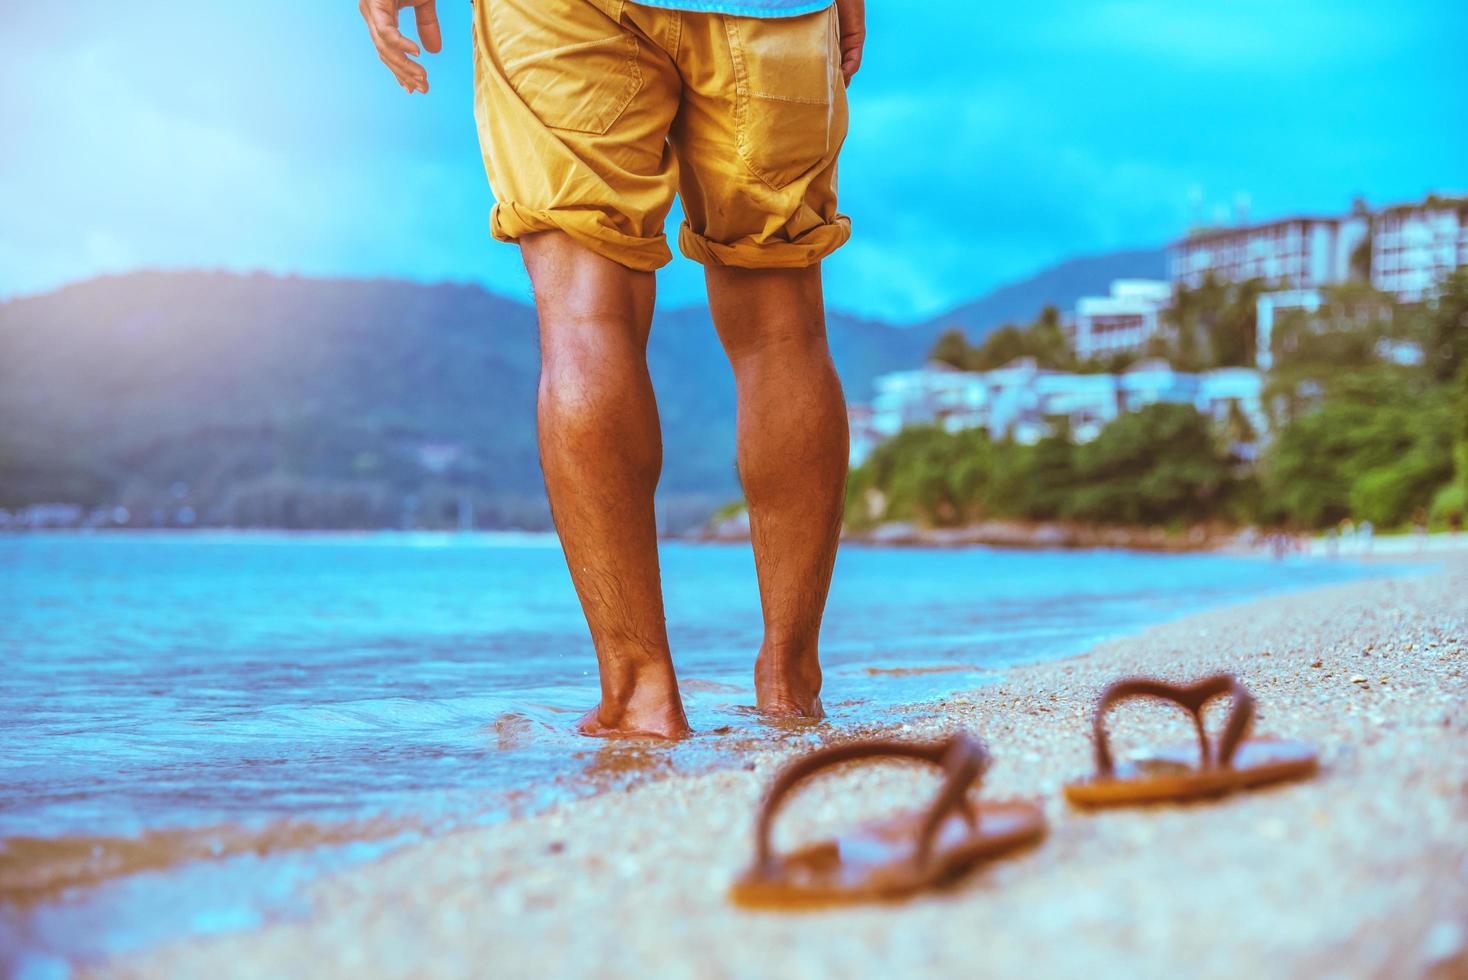 Asian man travel nature. Travel relax. Walking on the beach. In the summer photo